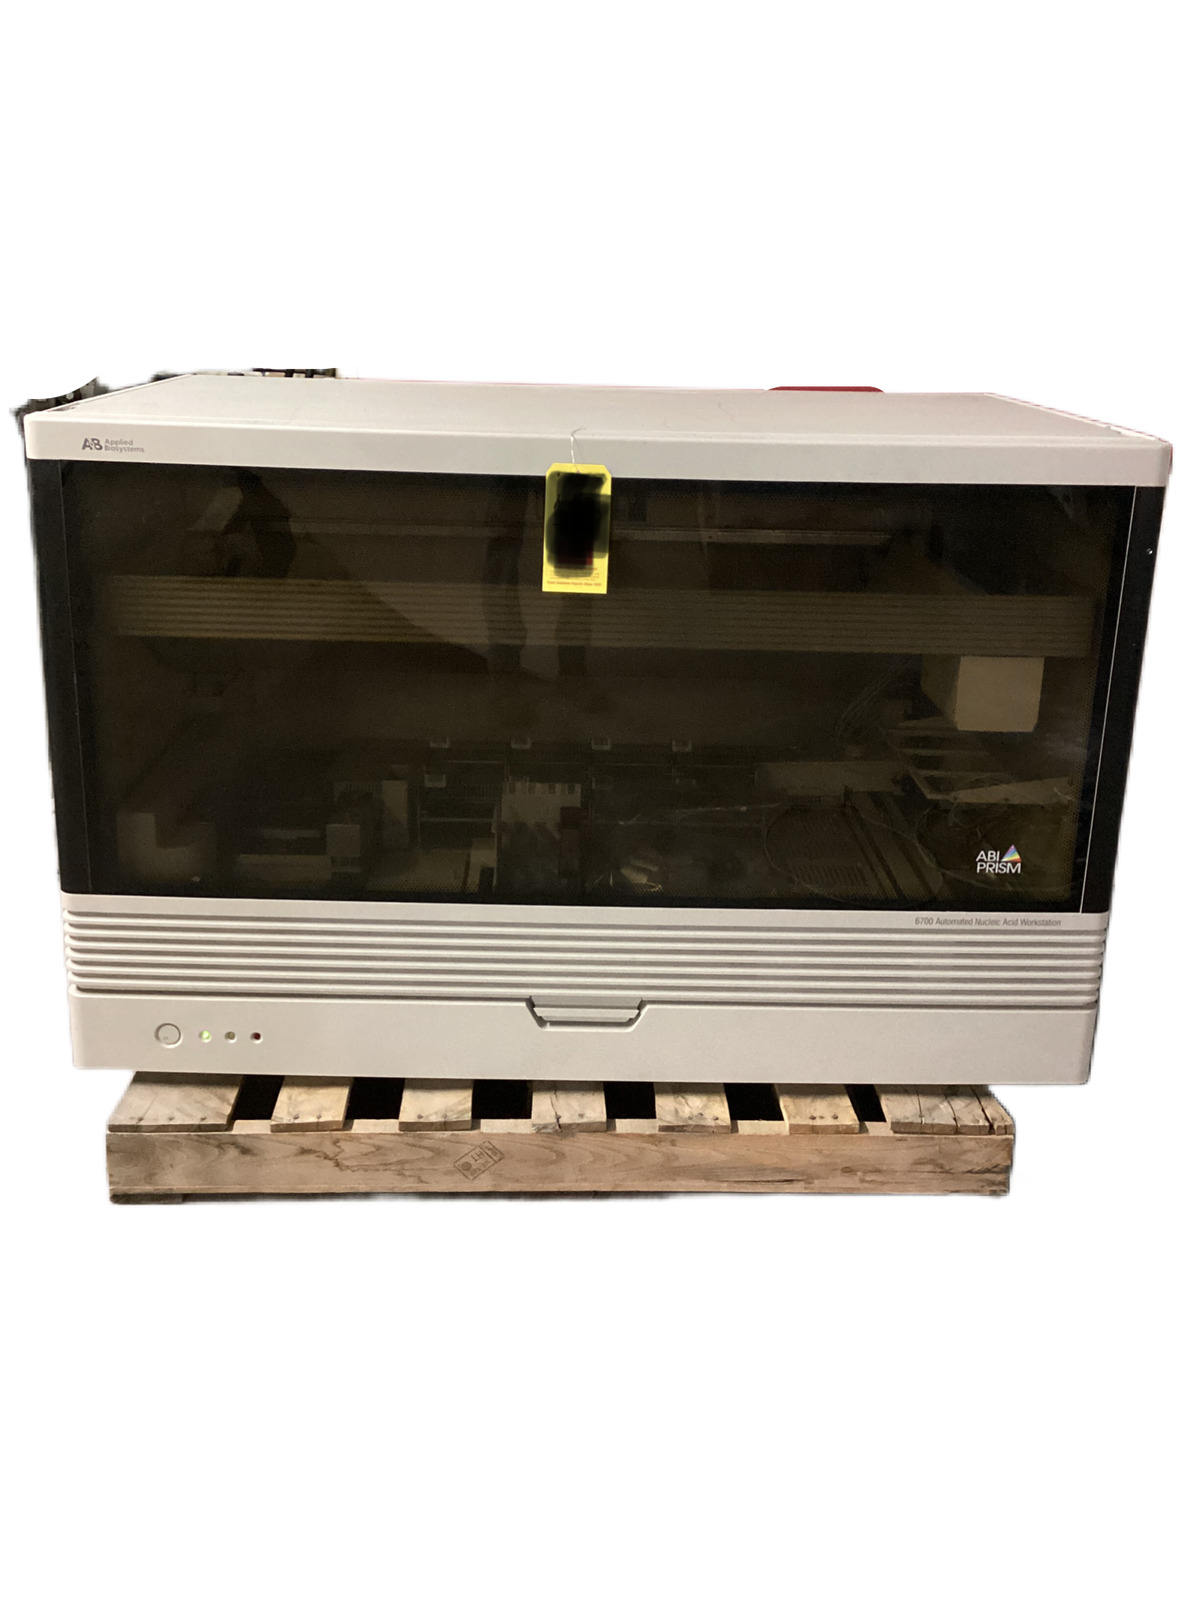 Applied Biosystems Prism 6700 Automated Nucleic Acid Workstation